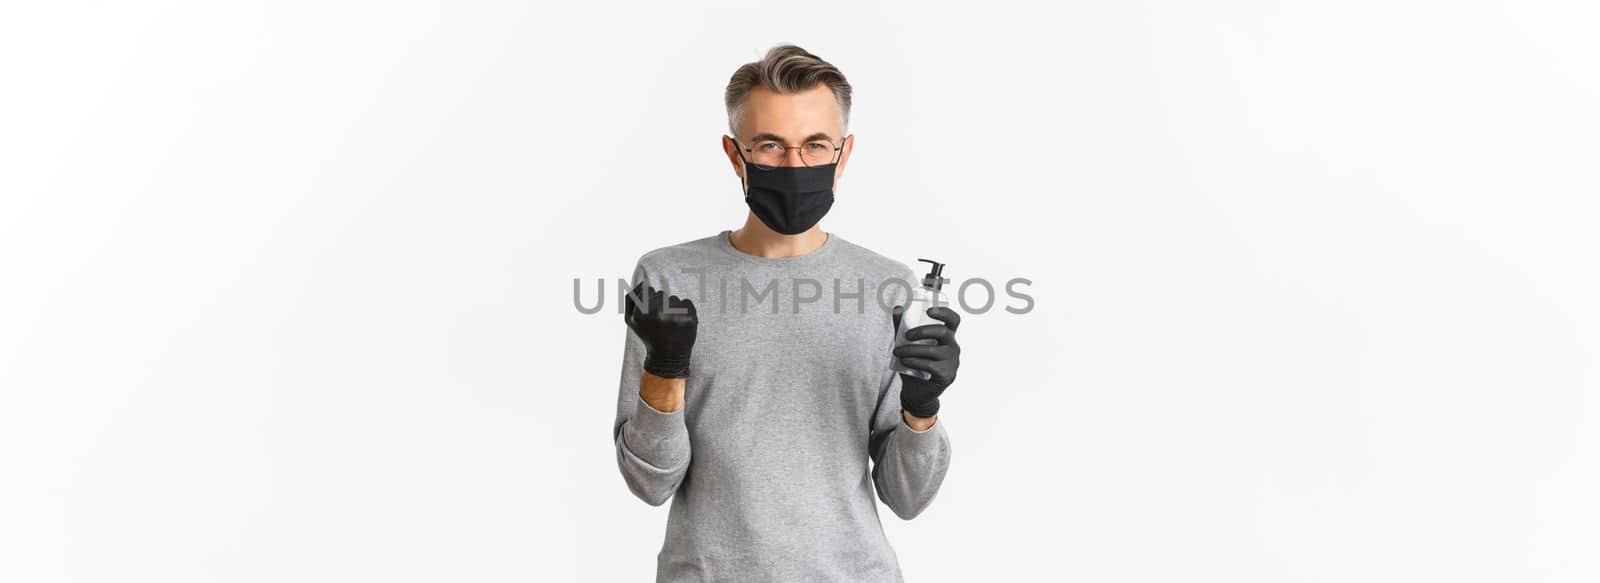 Concept of coronavirus, lifestyle and quarantine. Image of cheerful caucasian man in medical mask and gloves, showing hand sanitizer and making fist pump to rejoice, standing over white background.